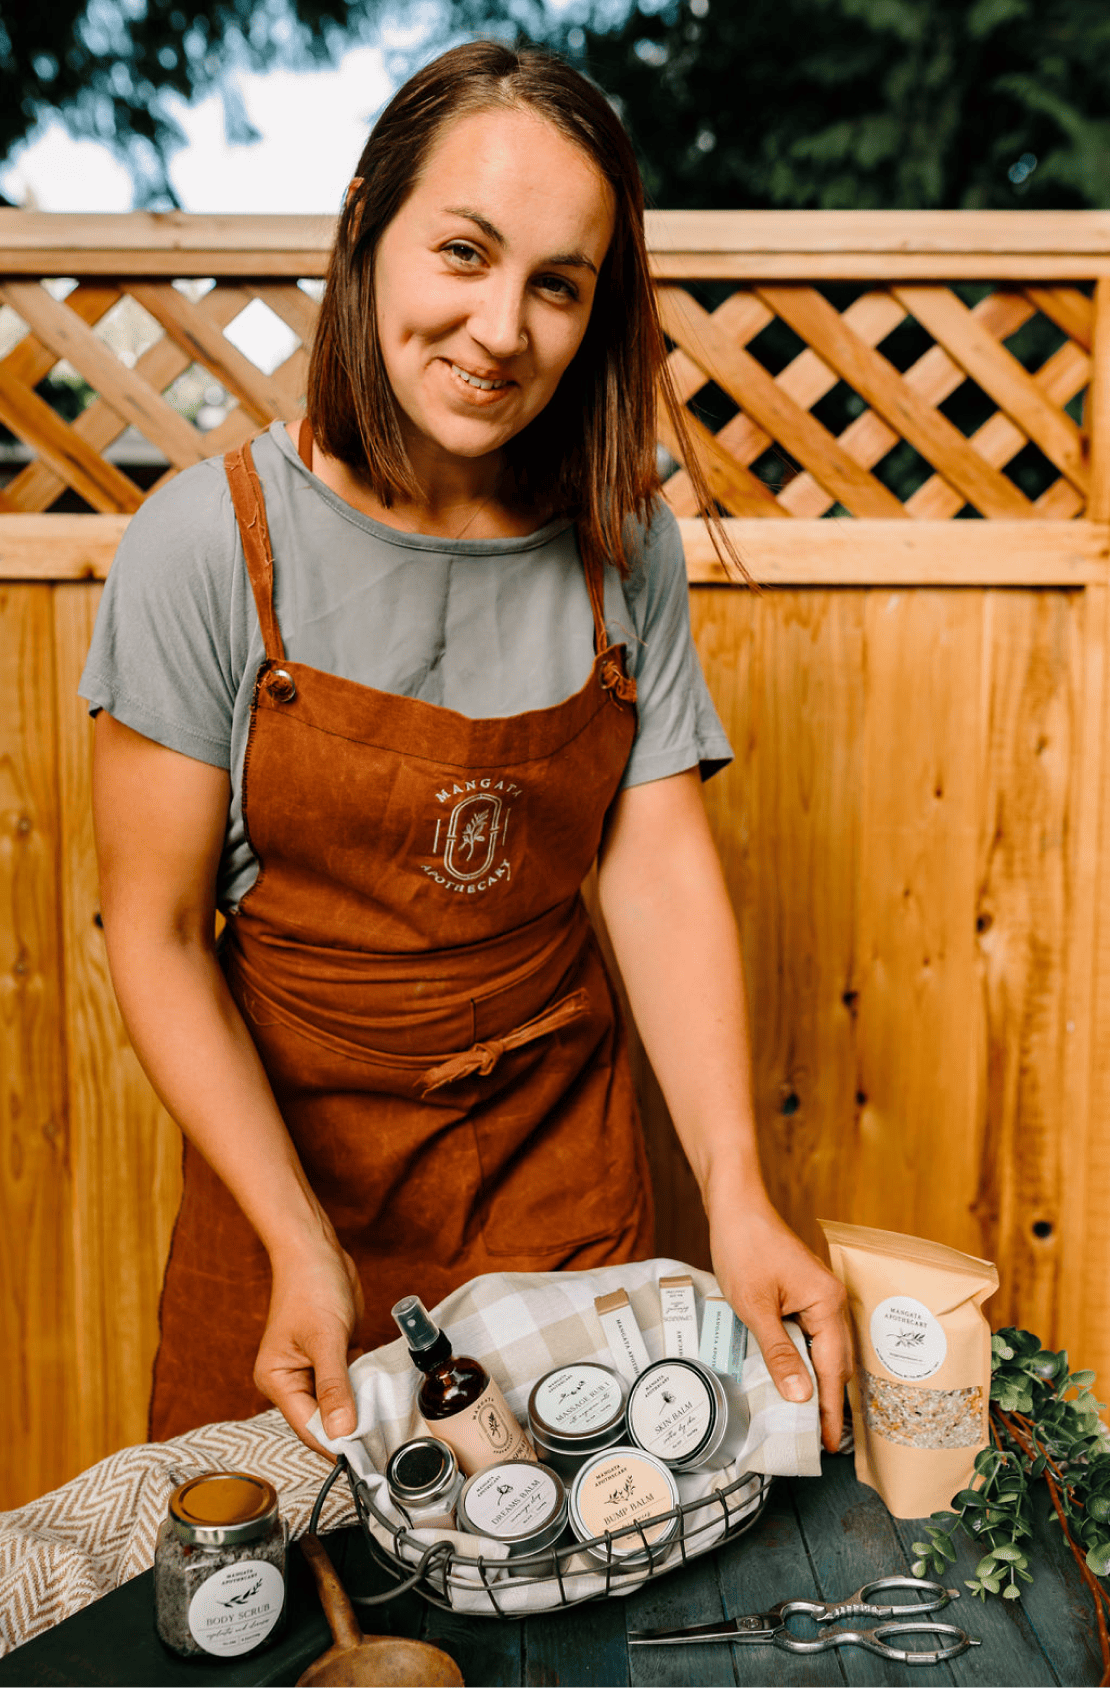 Founder of Mangata Apothecary, Stephanie Henderland, wears an apron and holds a basket of her products.